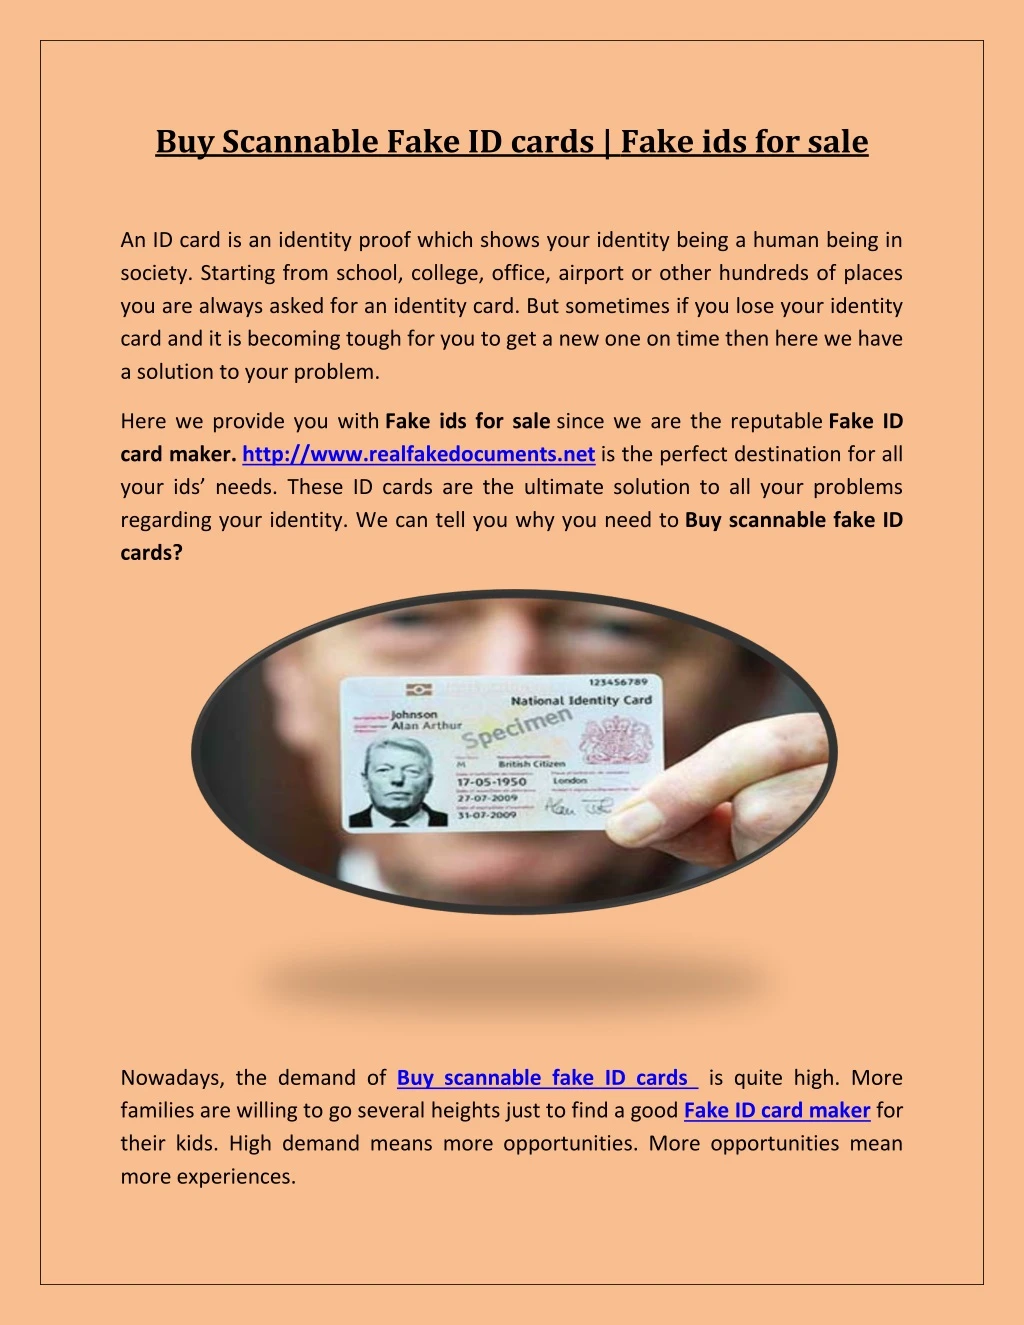 buy scannable fake id cards fake ids for sale